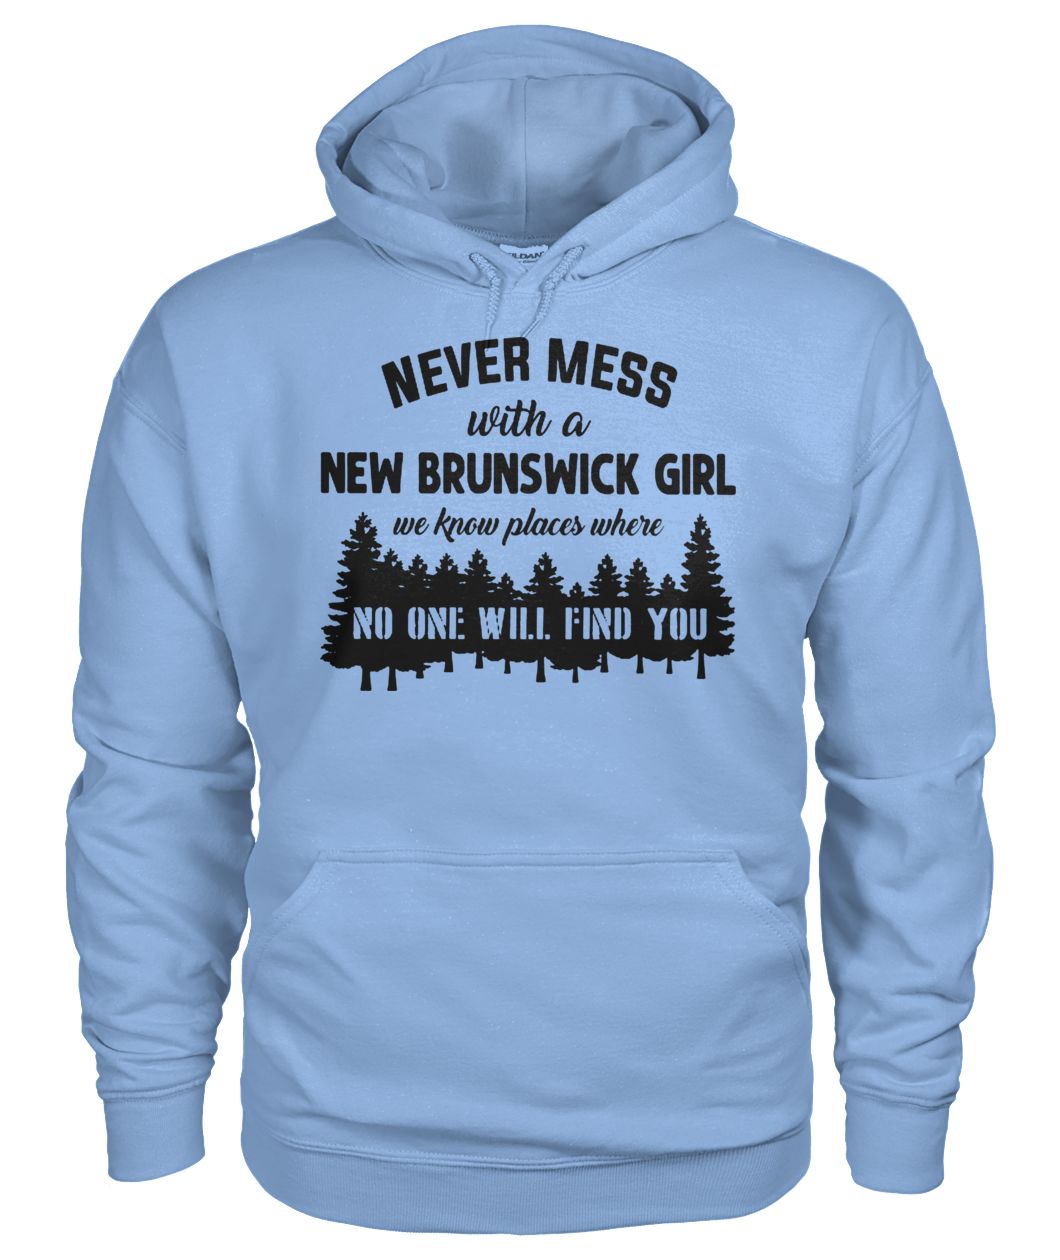 Never mess with a new brunswick girl we know places where no one will find you gildan hoodie